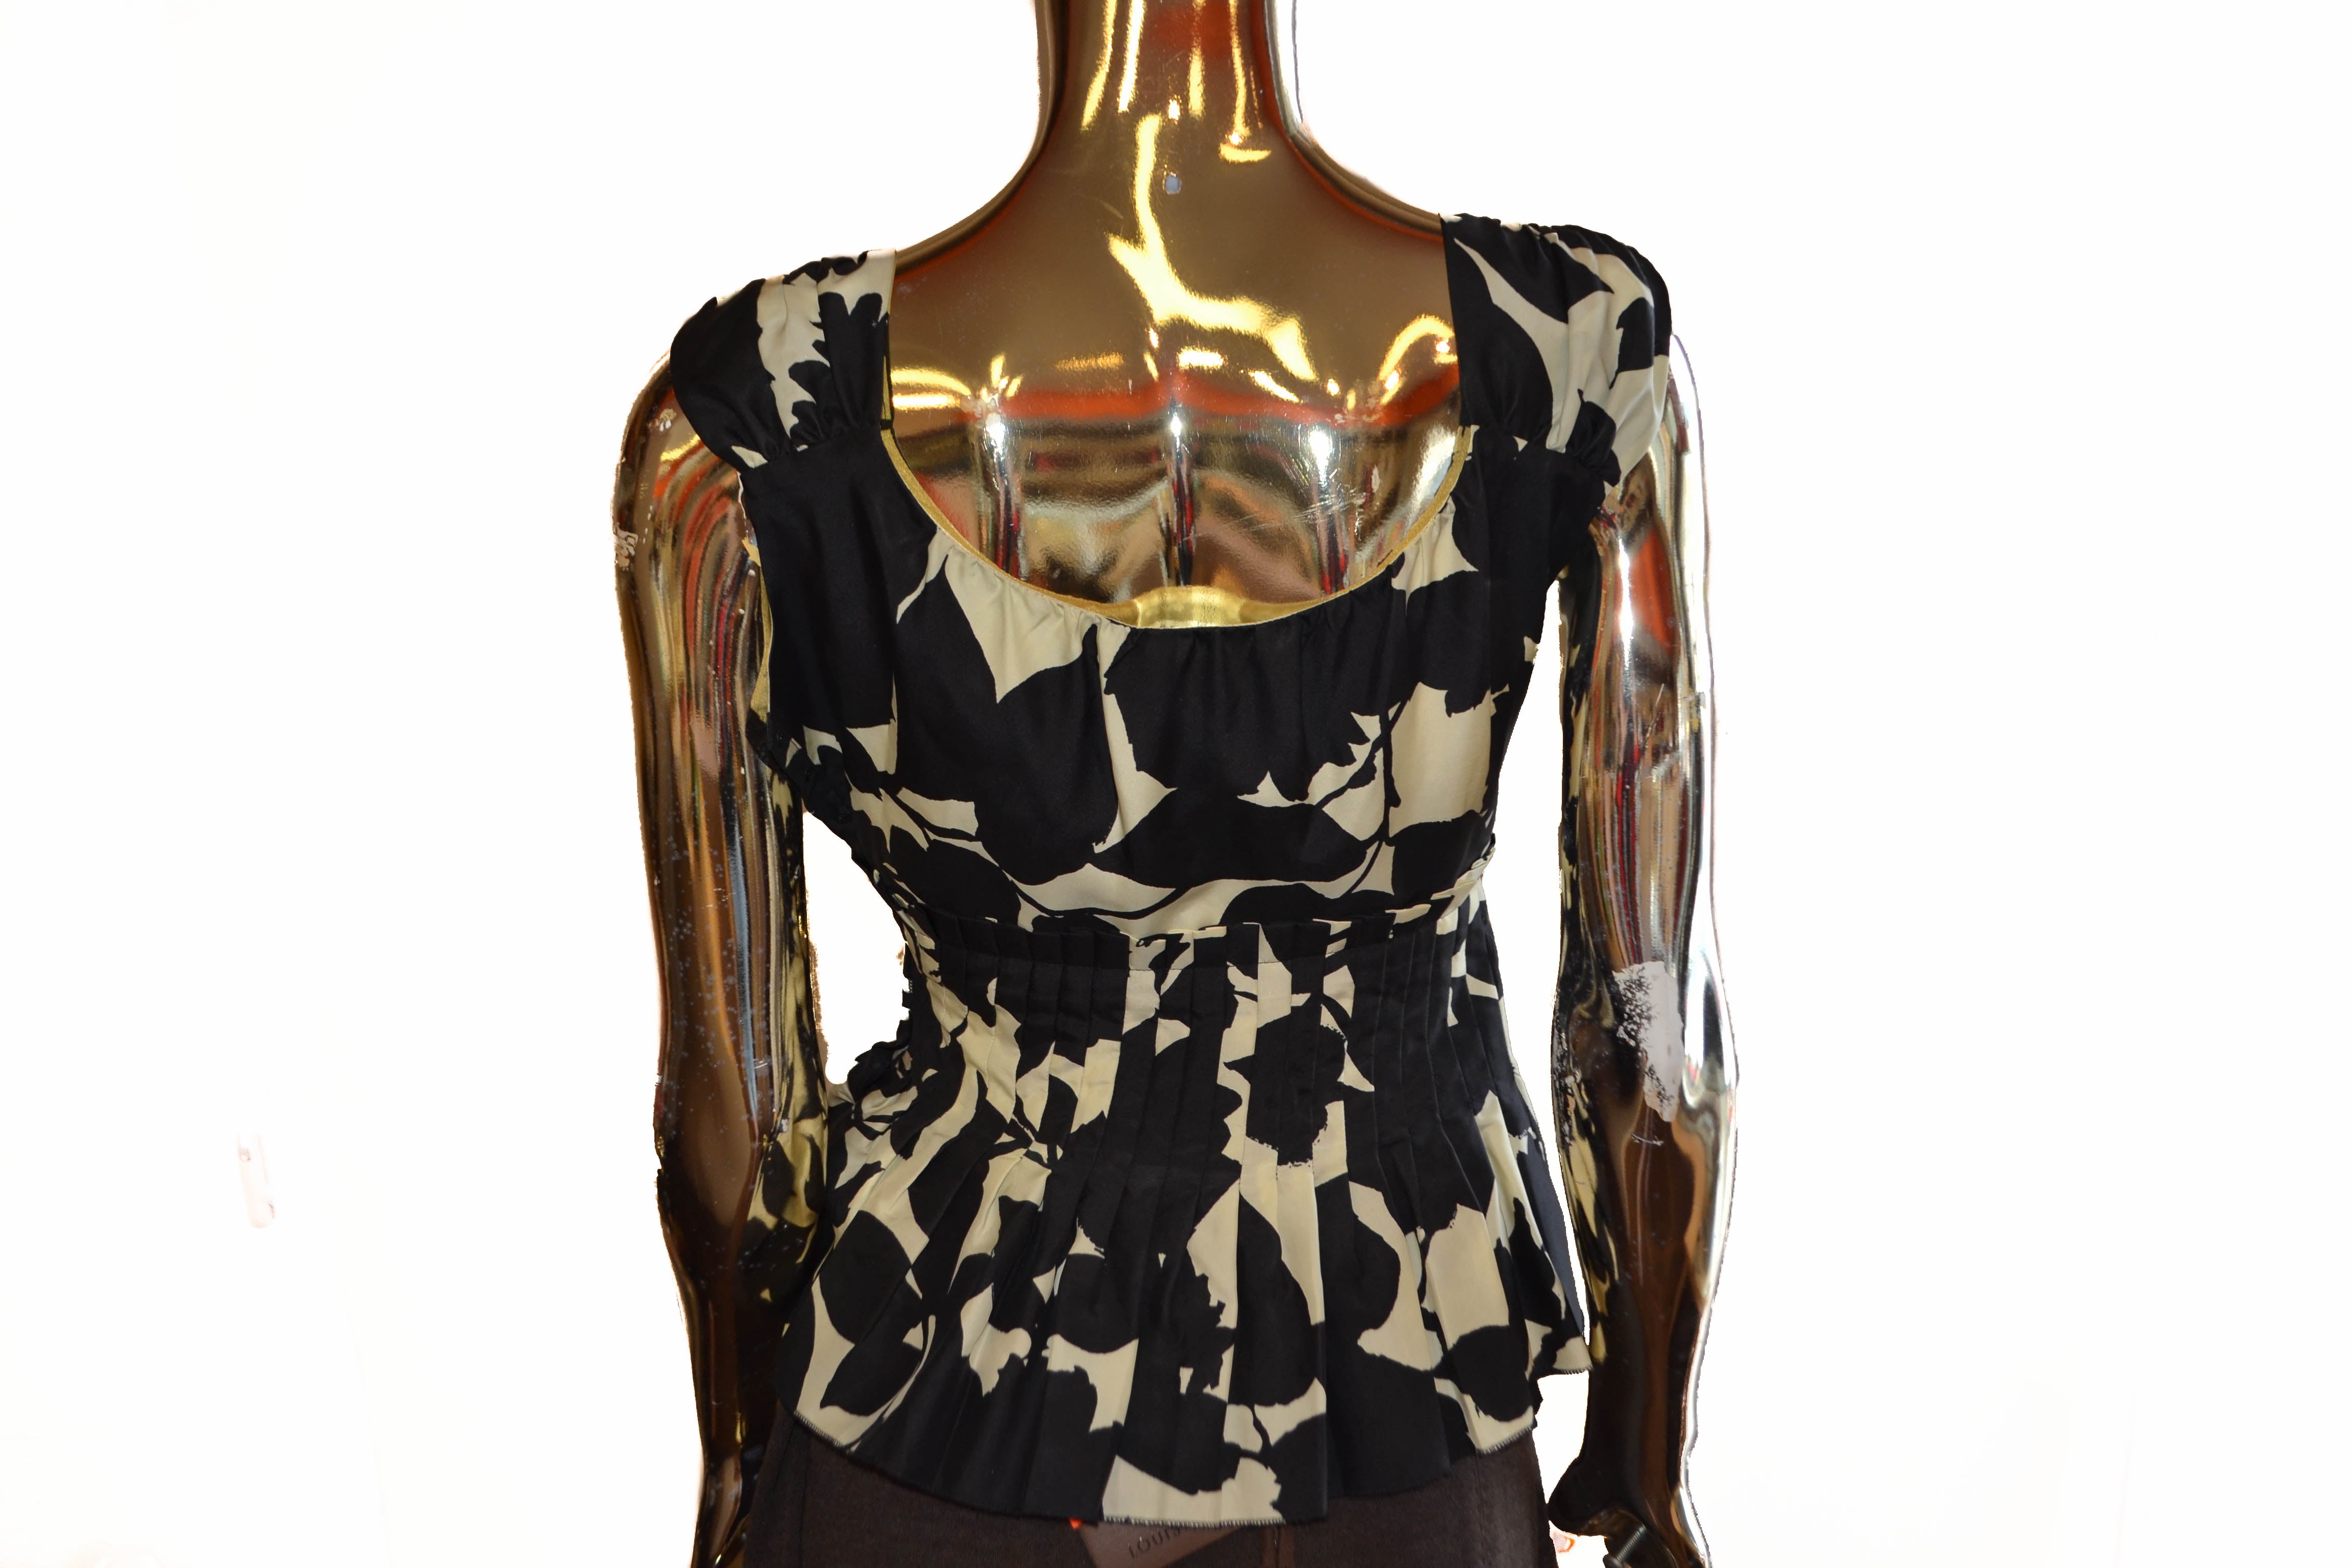 Authentic Moschino Black And Beige Floral Tank Top Size 4